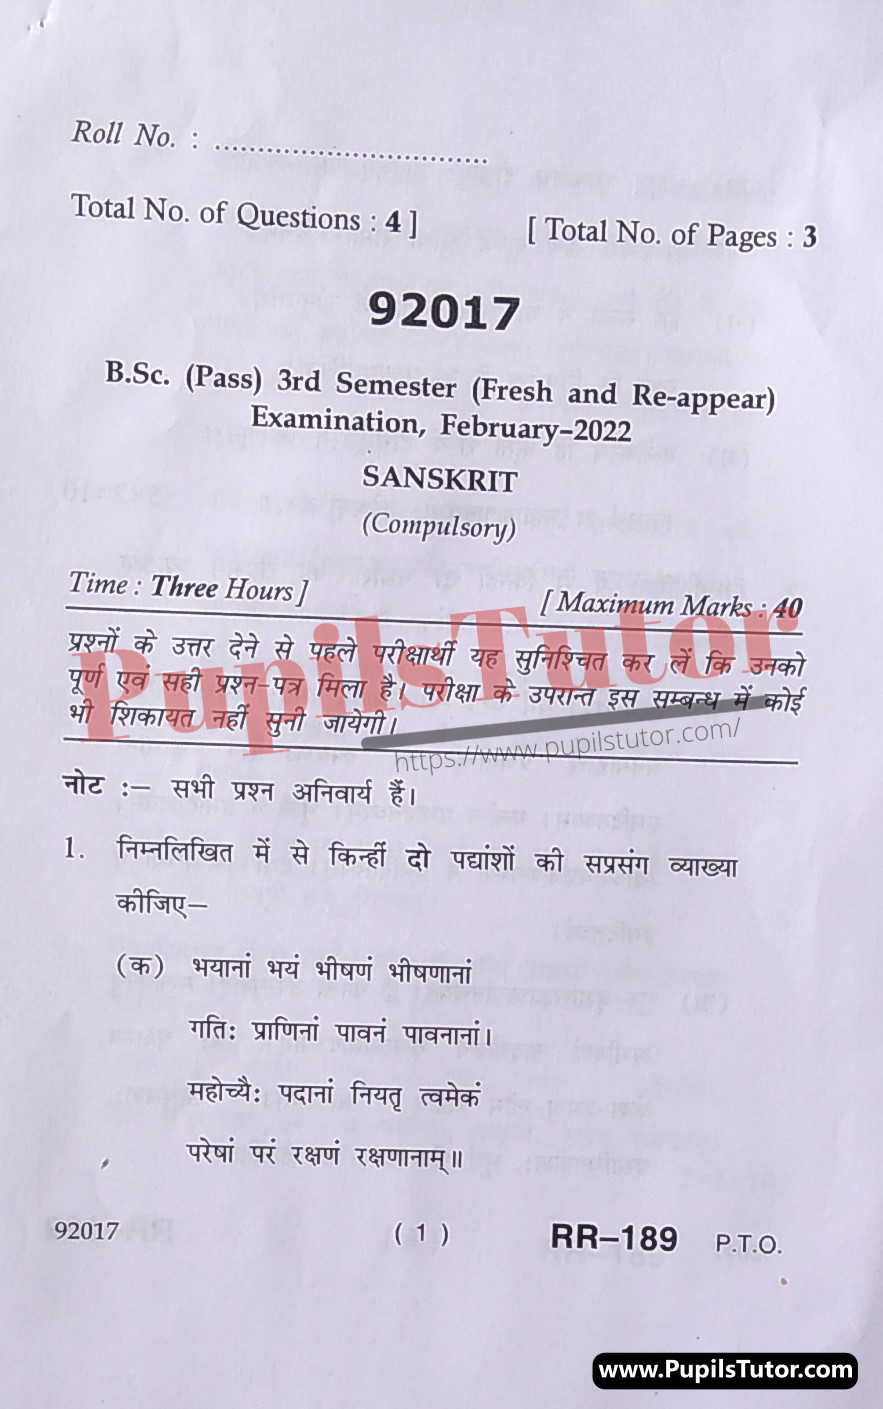 MDU (Maharshi Dayanand University, Rohtak Haryana) BSc Pass Course Third Semester Previous Year Sanskrit Question Paper For February, 2022 Exam (Question Paper Page 1) - pupilstutor.com